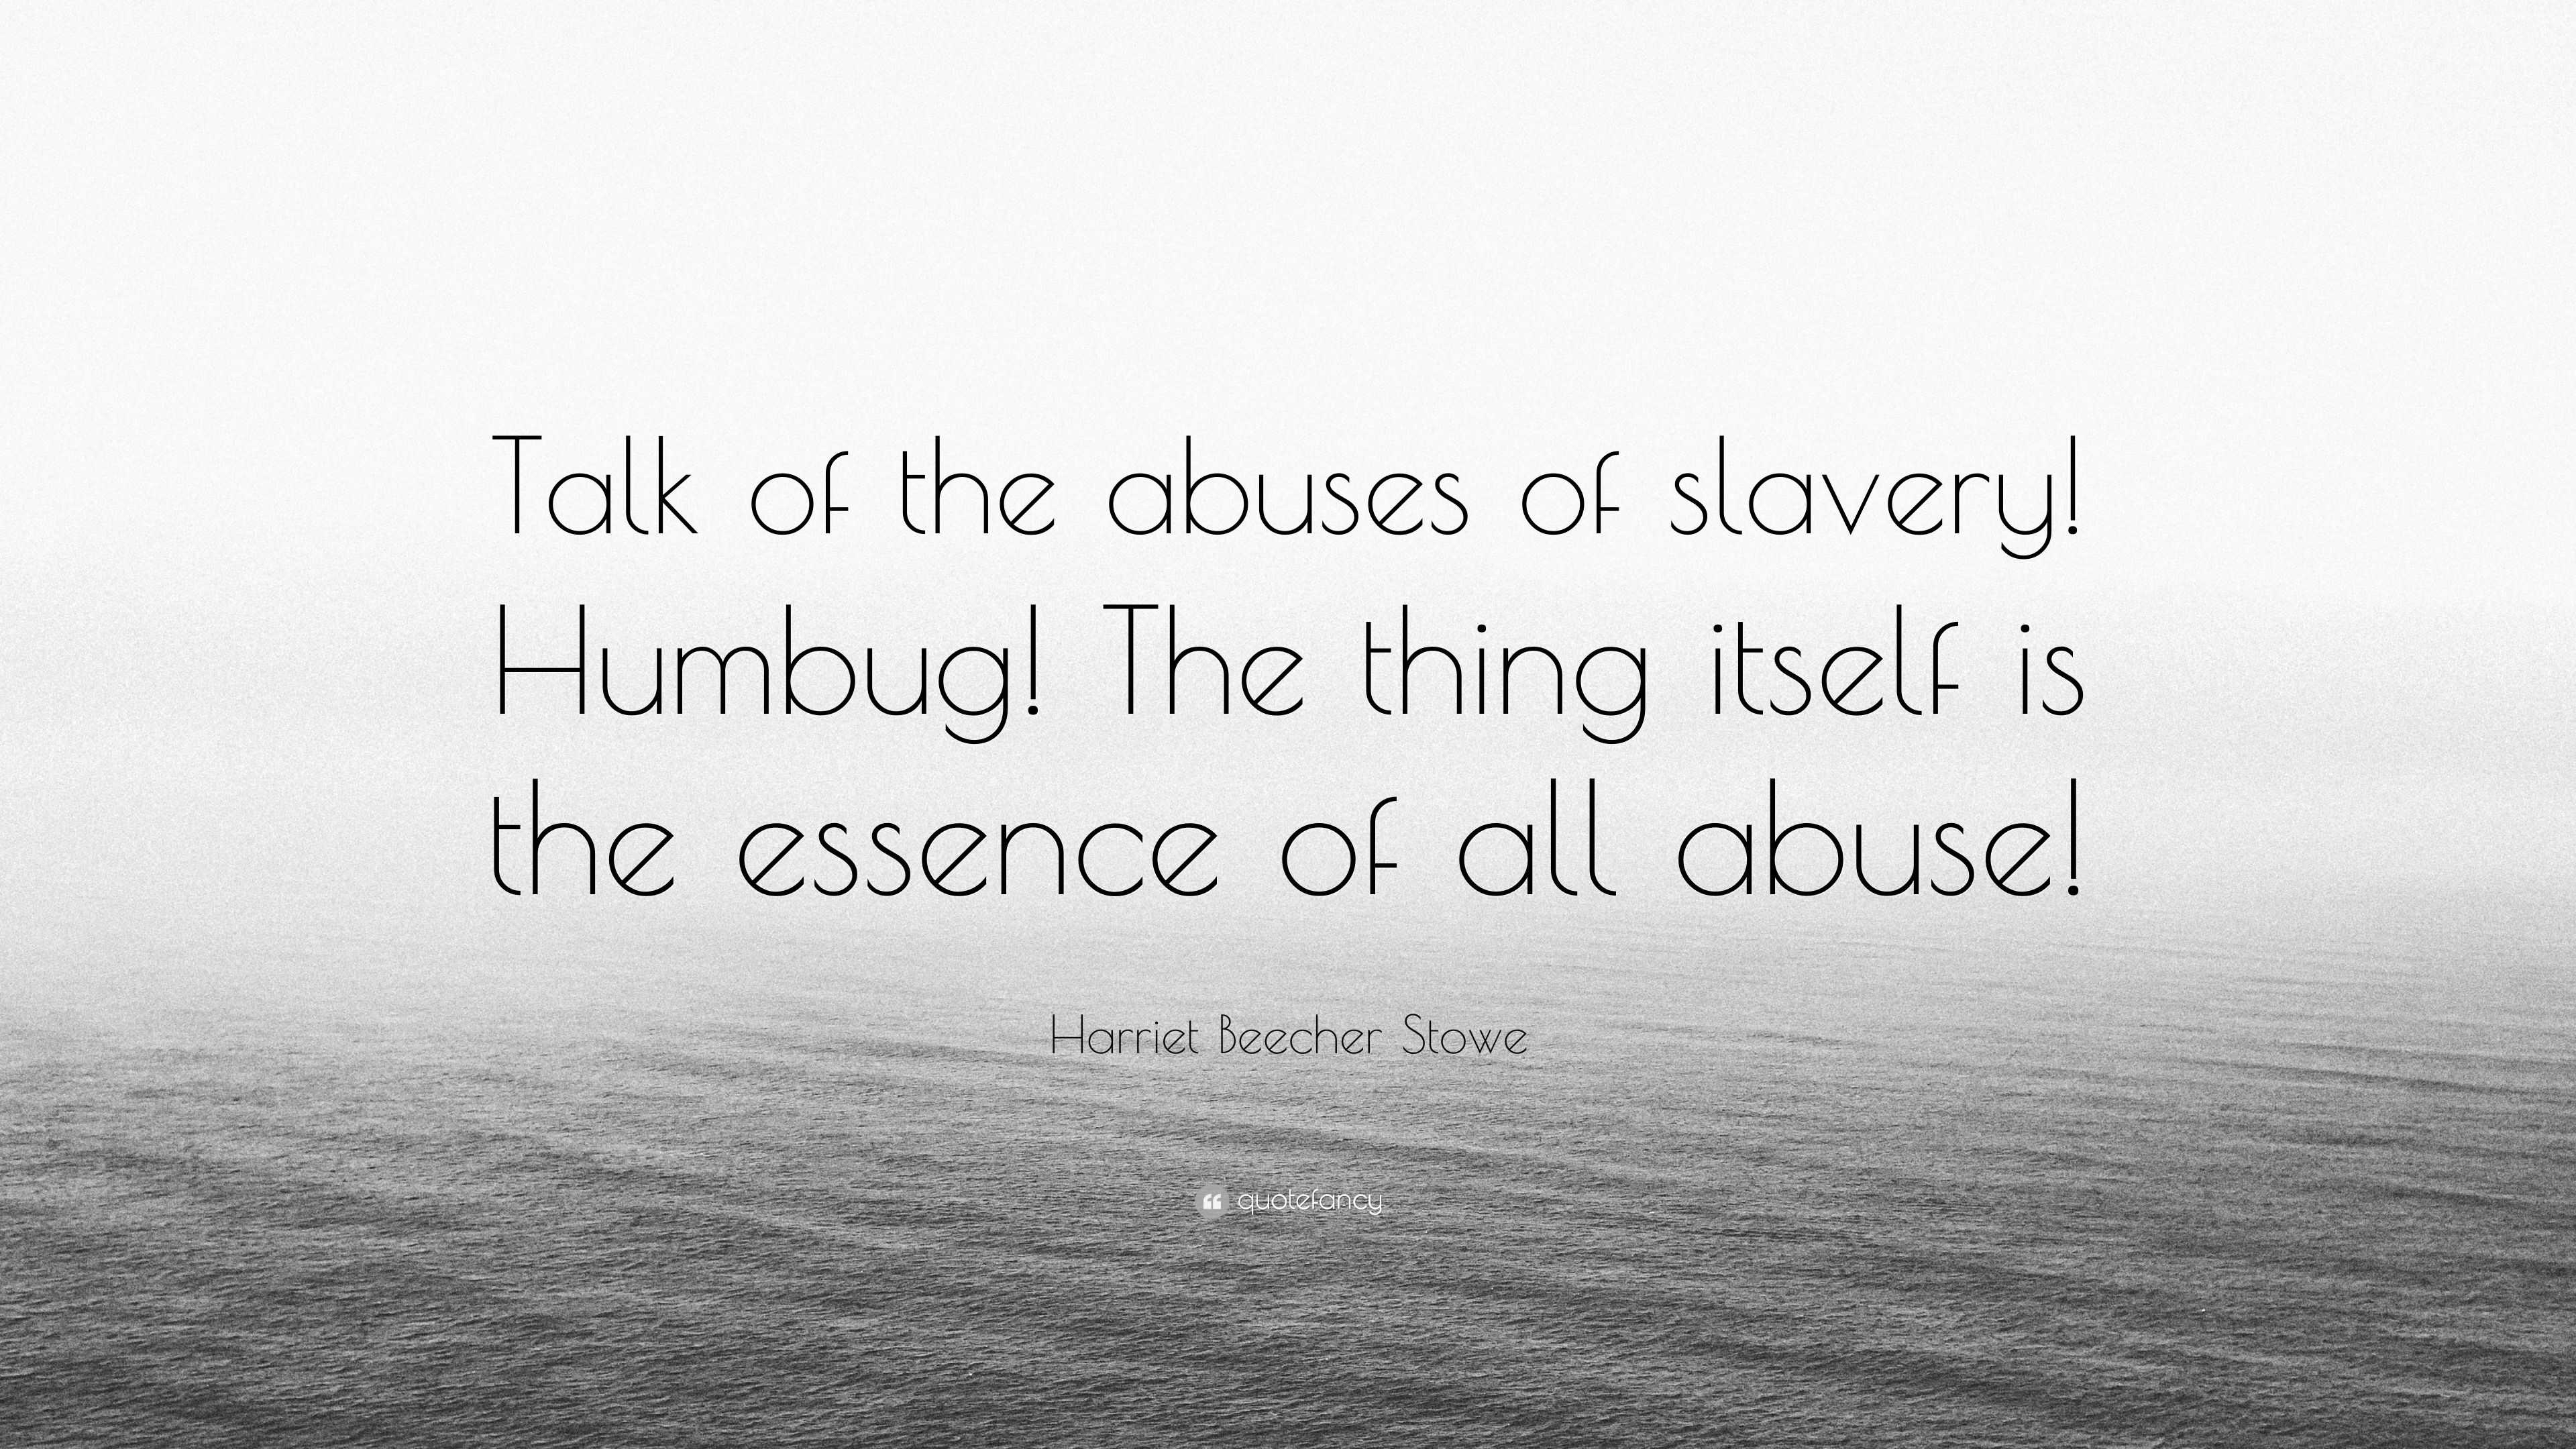 Harriet Beecher Stowe Quote: “Talk Of The Abuses Of Slavery! Humbug! The Thing Itself Is The